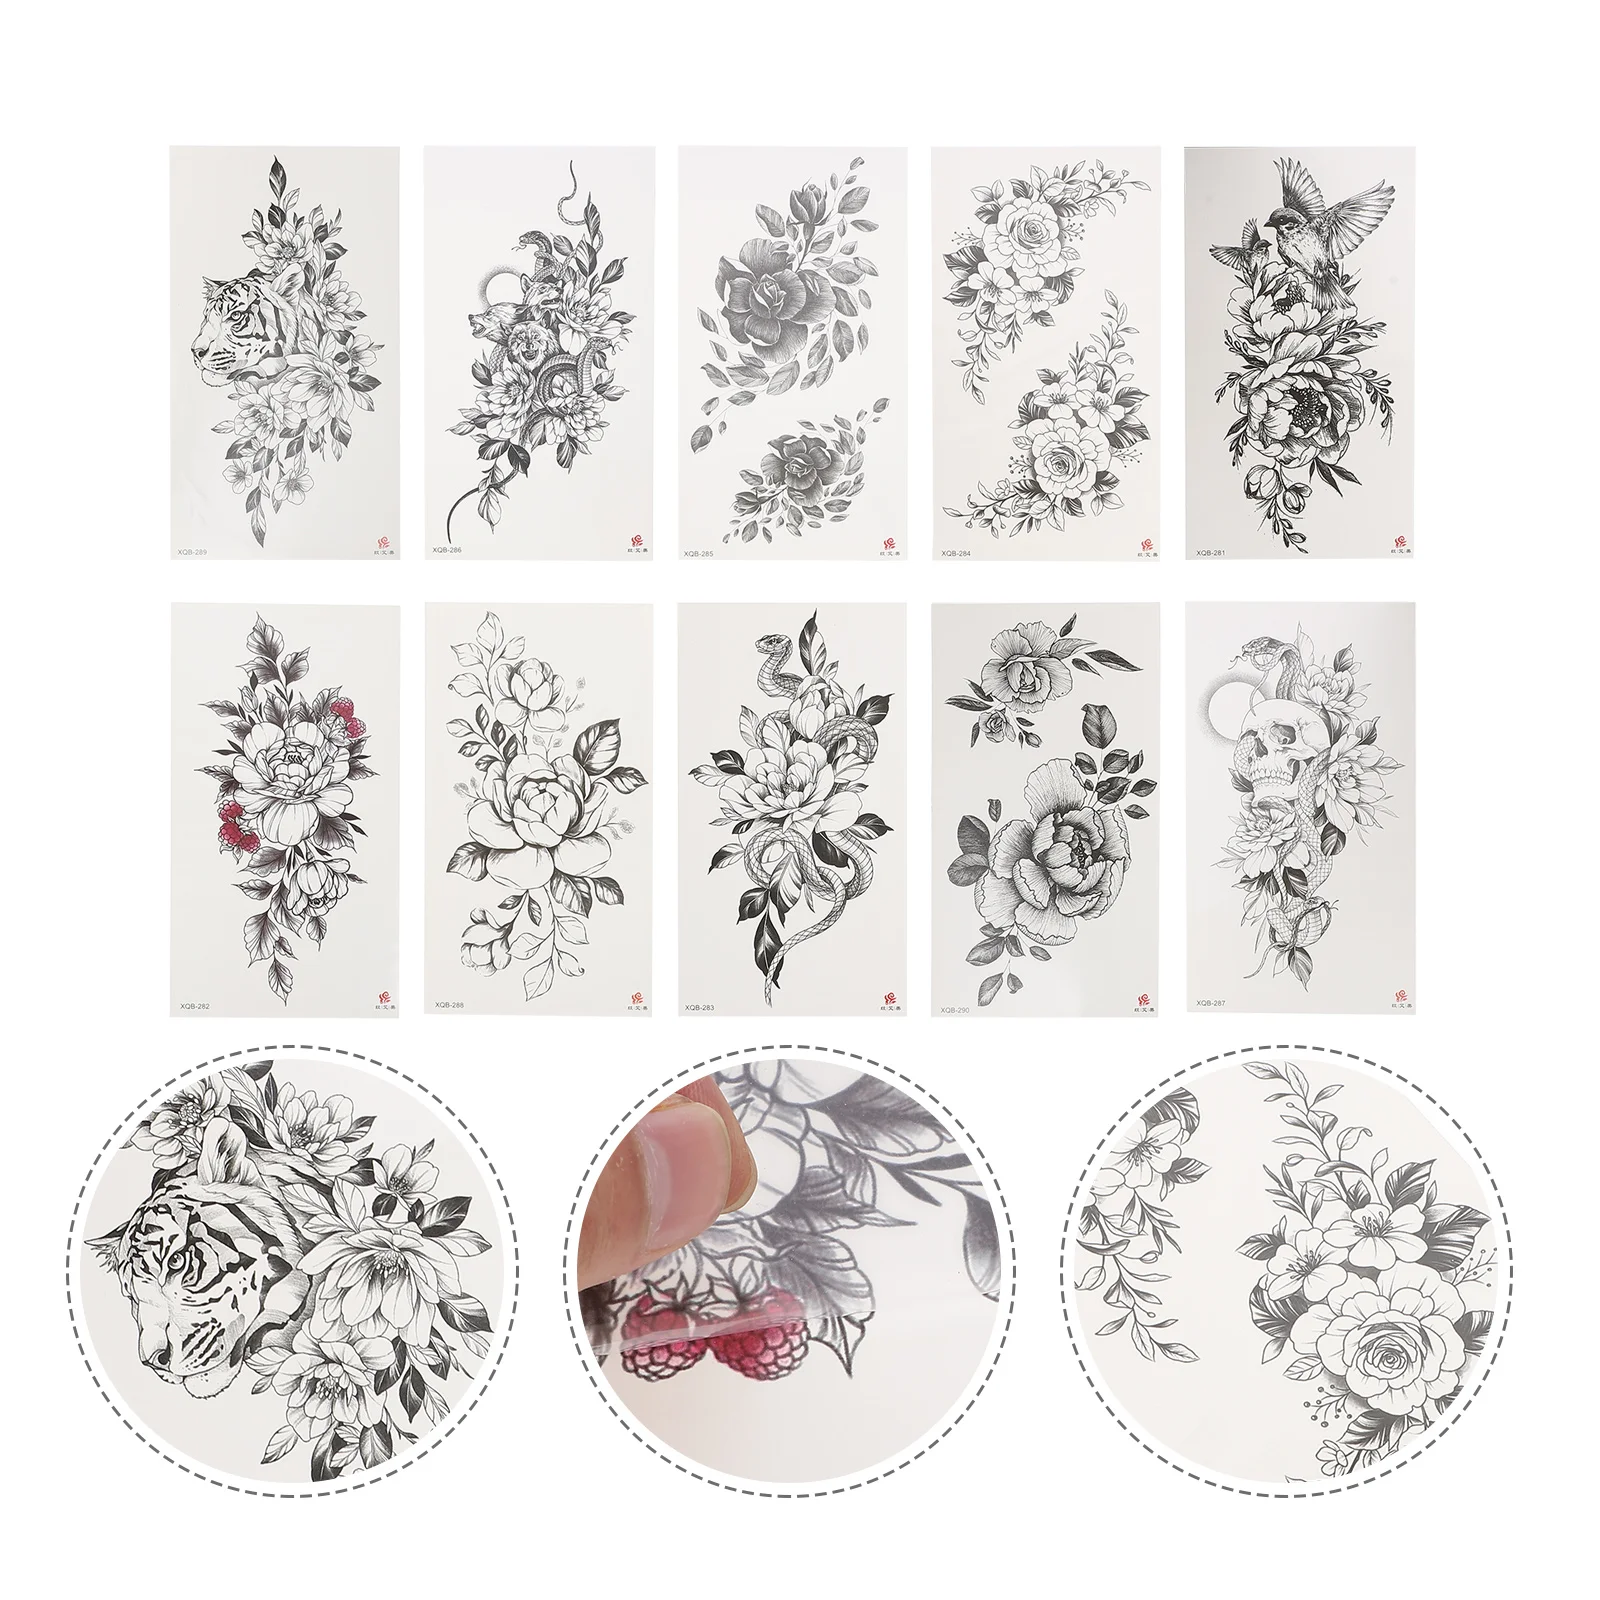 

10 Sheets Arm Tattoo Stickers Fake Tattoos Waterproof Temporary Decal The Flowers Transfer Body